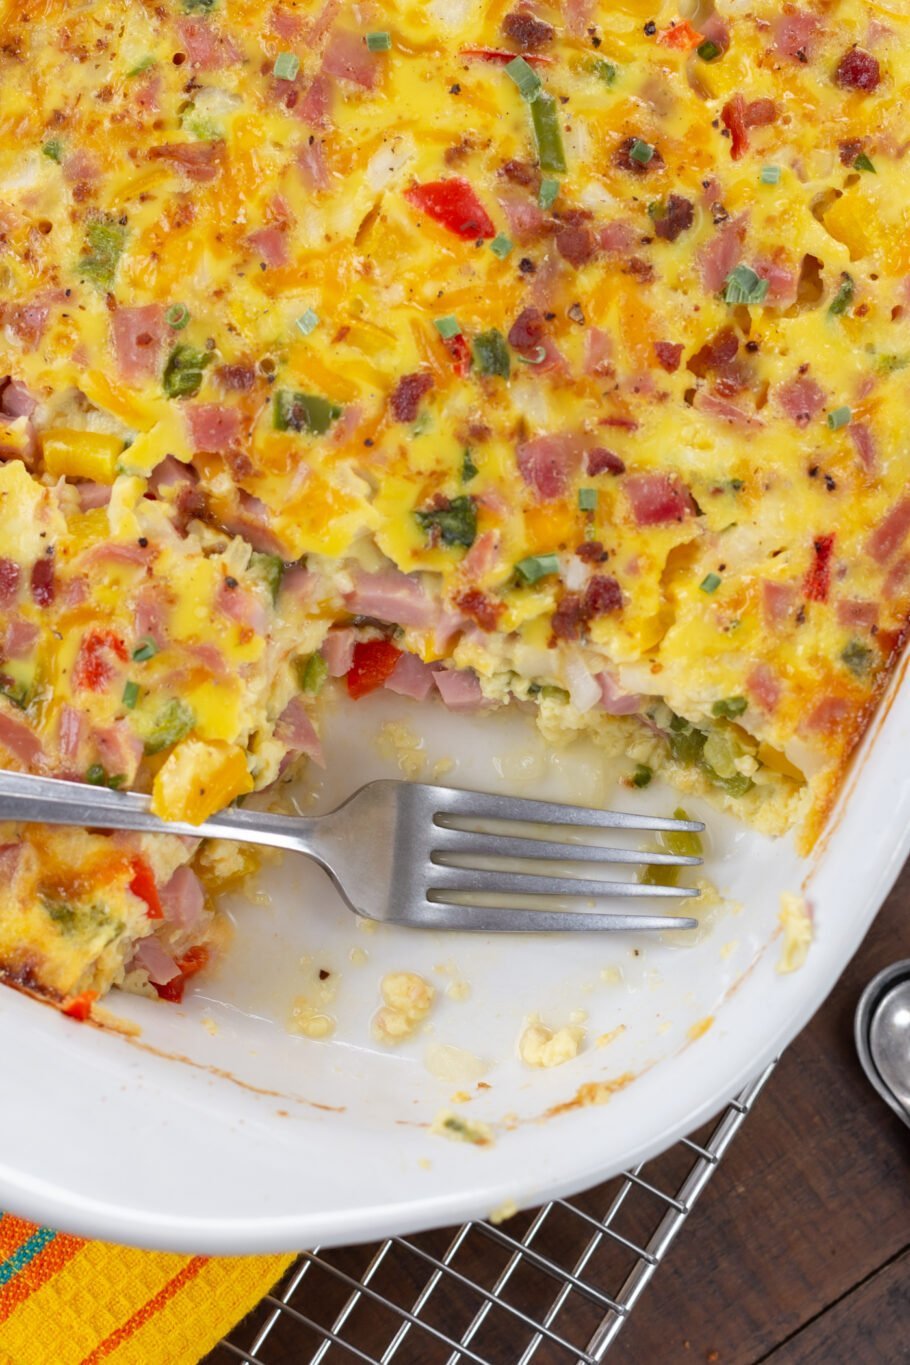 https://media.theproteinchef.co/wp-content/uploads/2022/06/Healthy-Breakfast-Casserole-Piece-Removed-910x1365.jpg